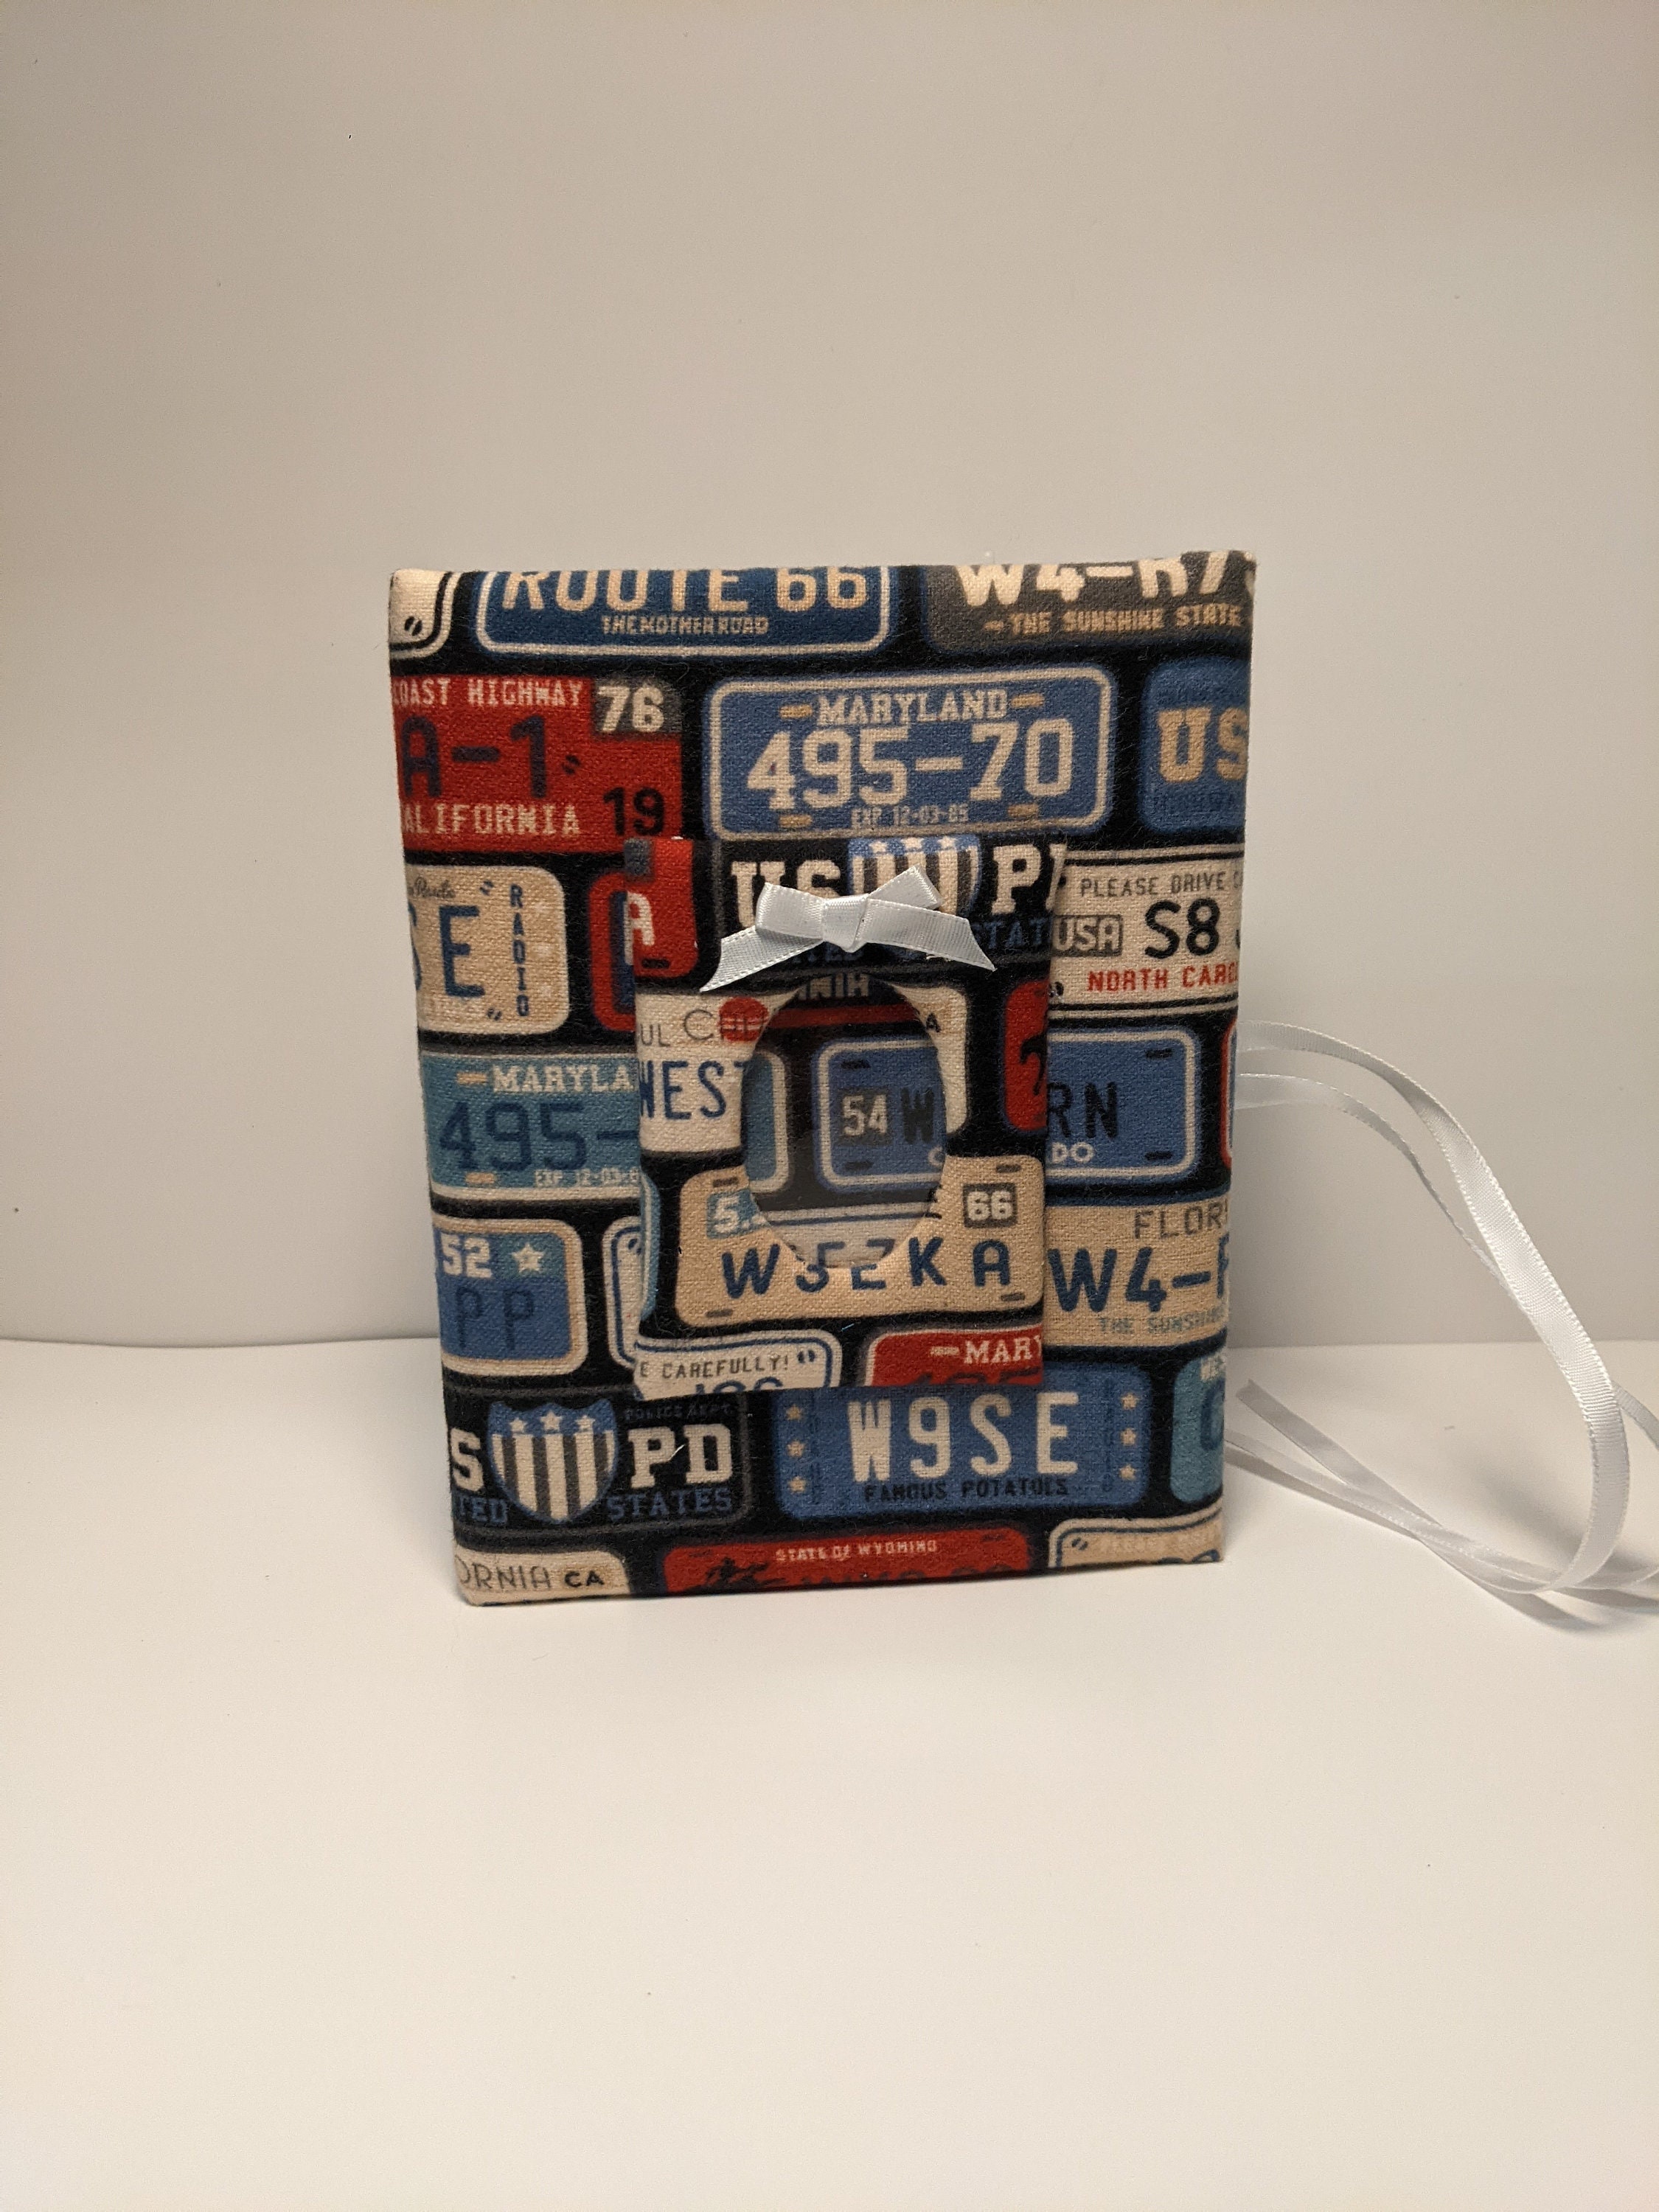 4x6 Photo Album made from a license plate! –